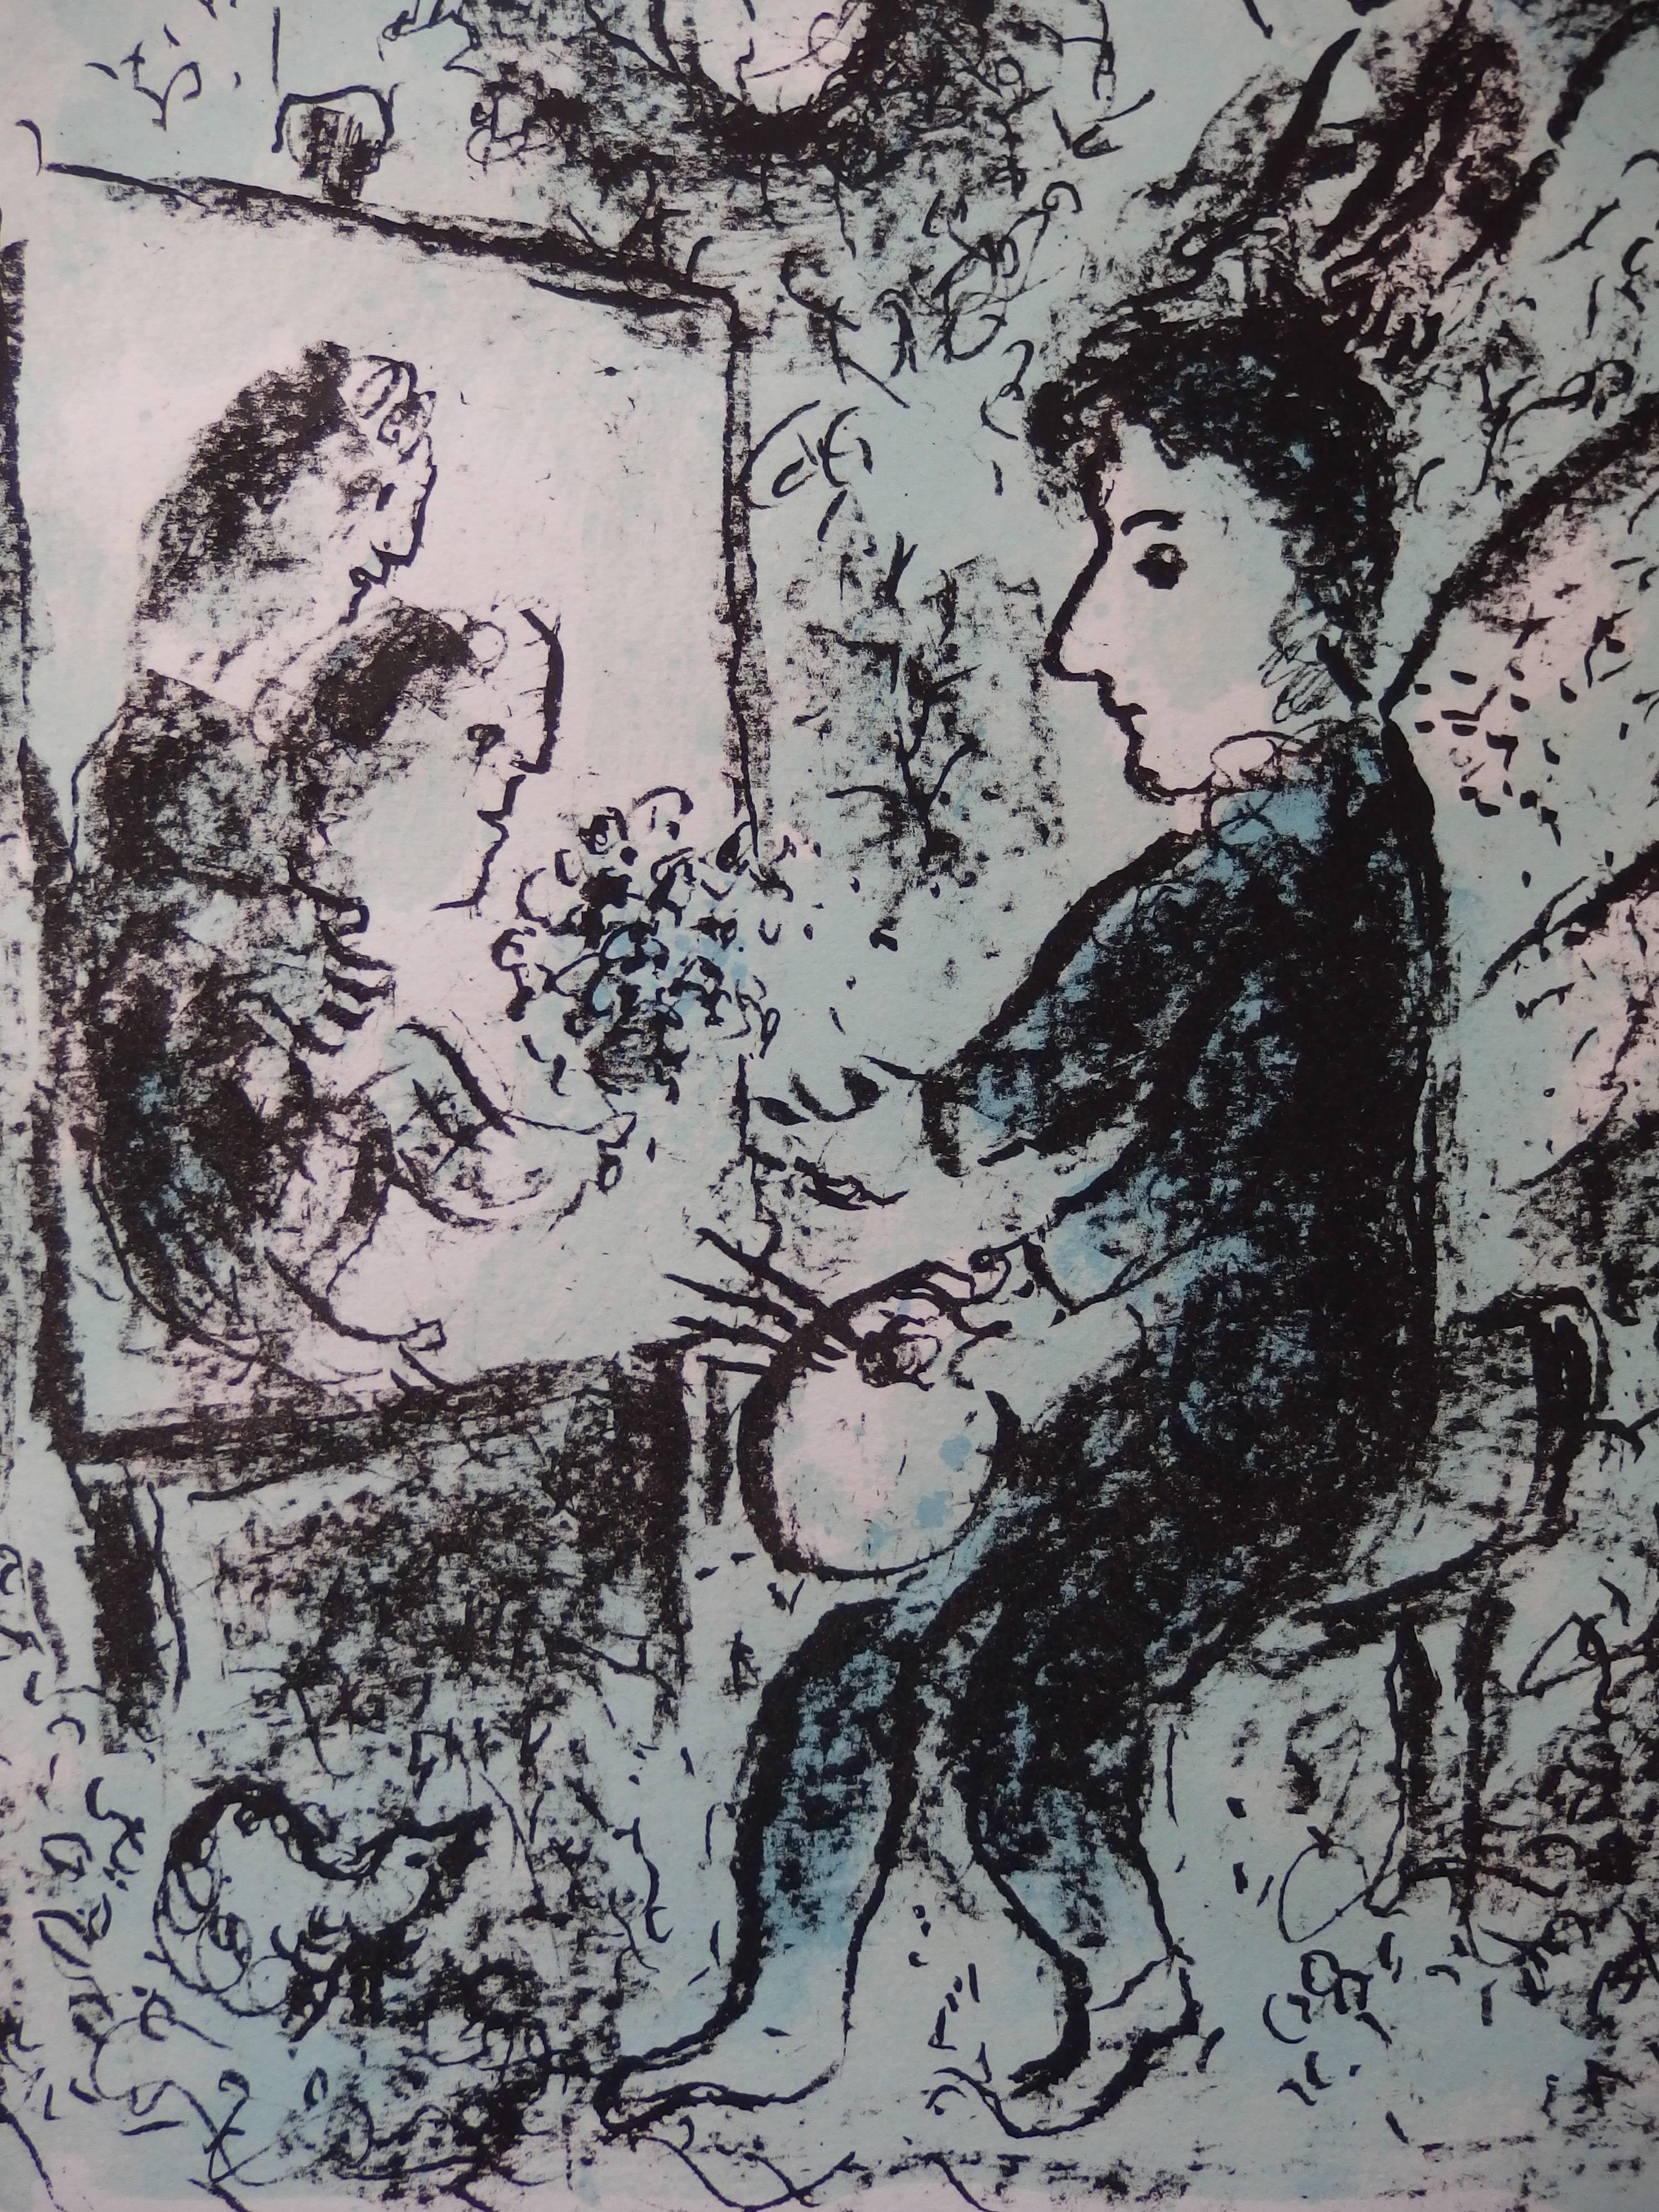 To The Other Clarity - Gray Figurative Print by Marc Chagall